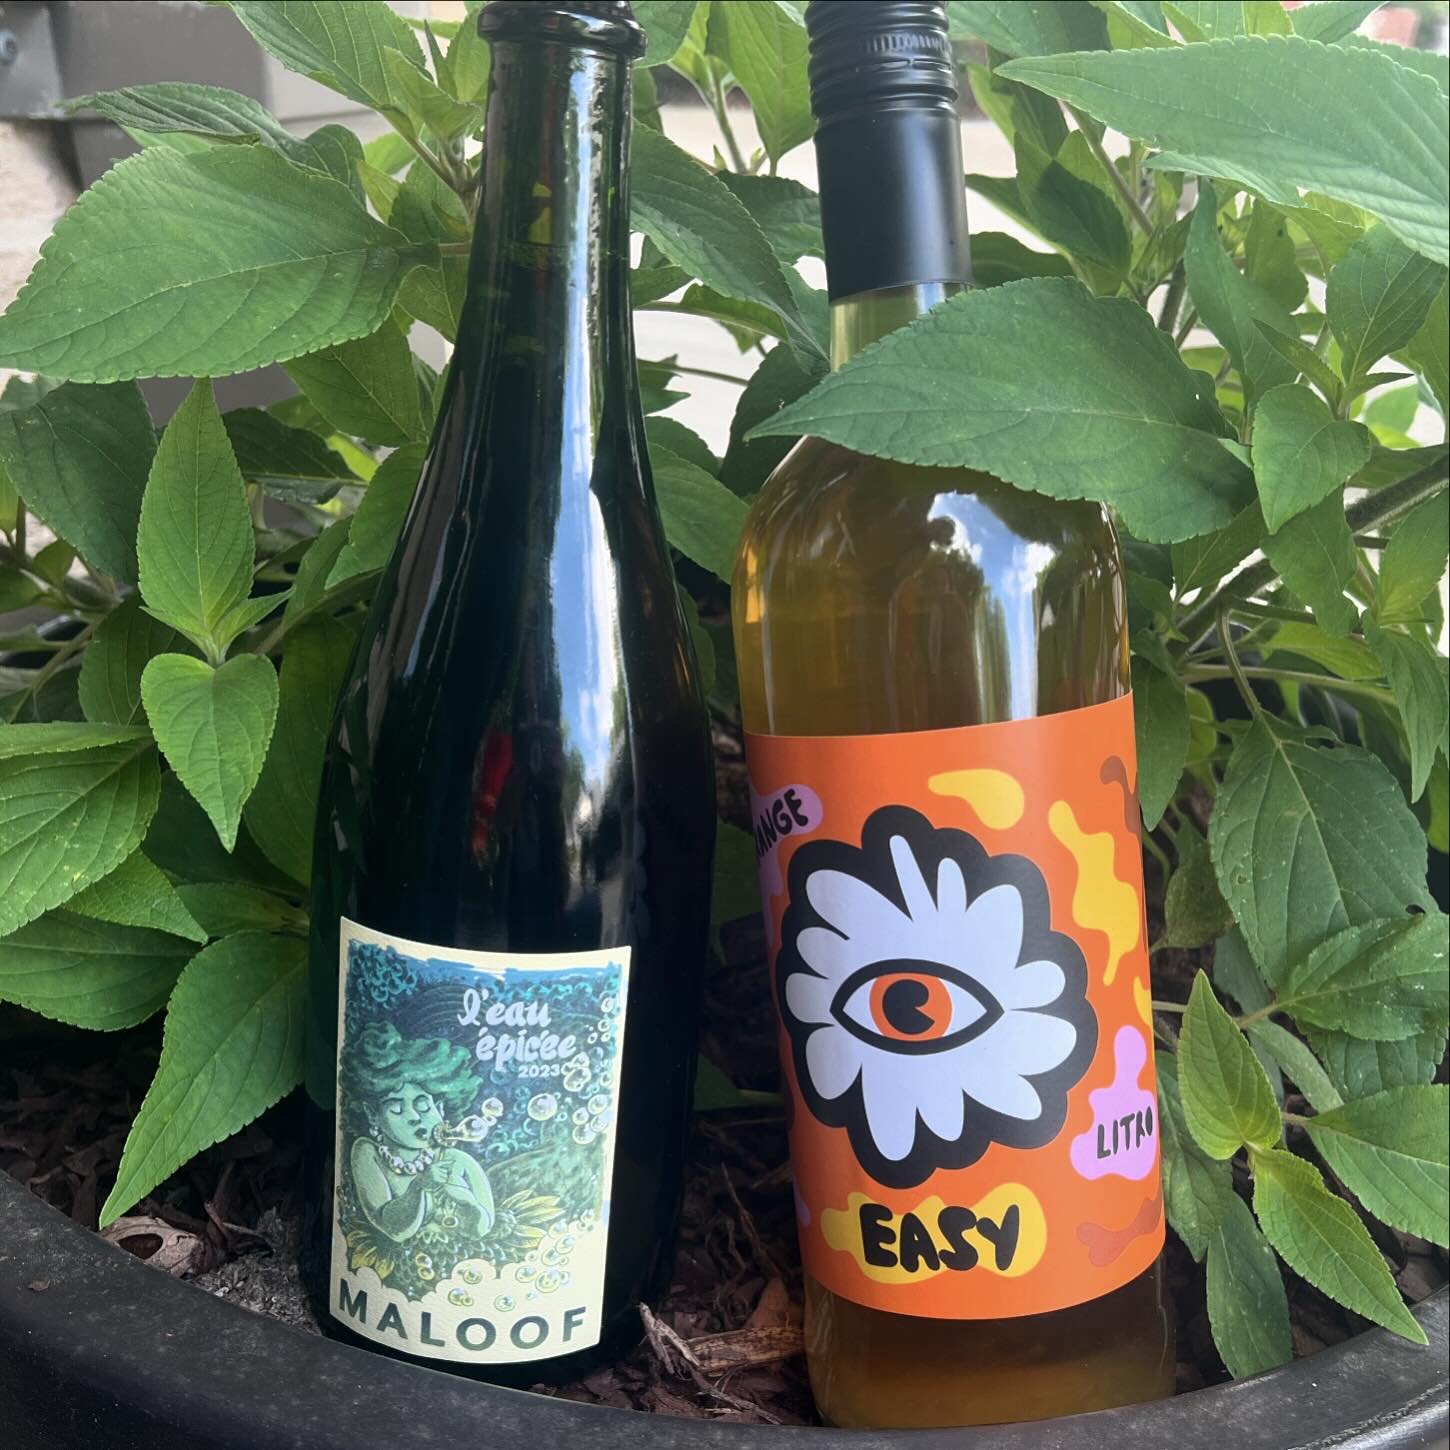 Whatcha Drinking Wednesday!

Two cuties in our bottle shop that we&rsquo;re obsessed with and are going quickly! 

Maloof L&rsquo;Eau &Eacute;pic&eacute;e Pet-Nat - tropical fruits, lemon zest, light and dry! 🍍🍋
Tenuta l&rsquo;Armonia Easy Orange -